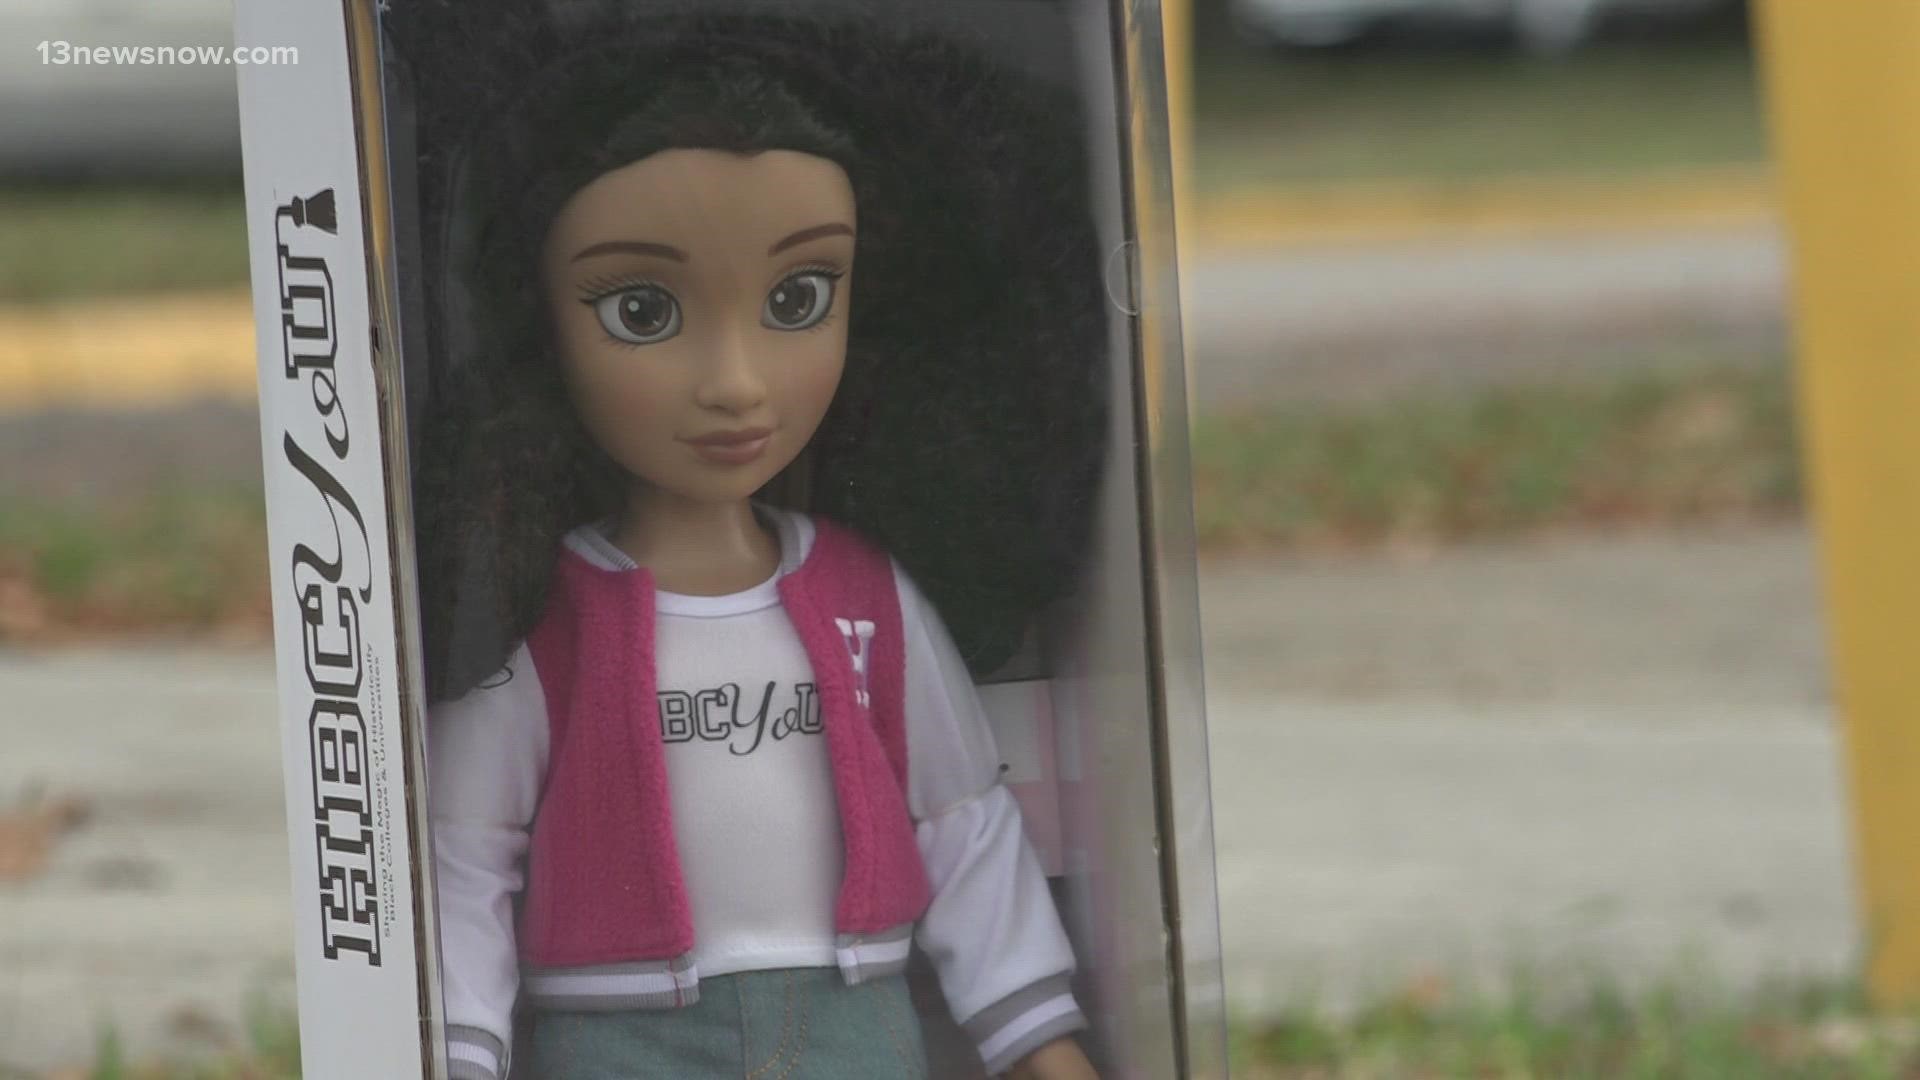 They're called "HBCyoU dolls" and they're meant to represent Historically Black Colleges and Universities.